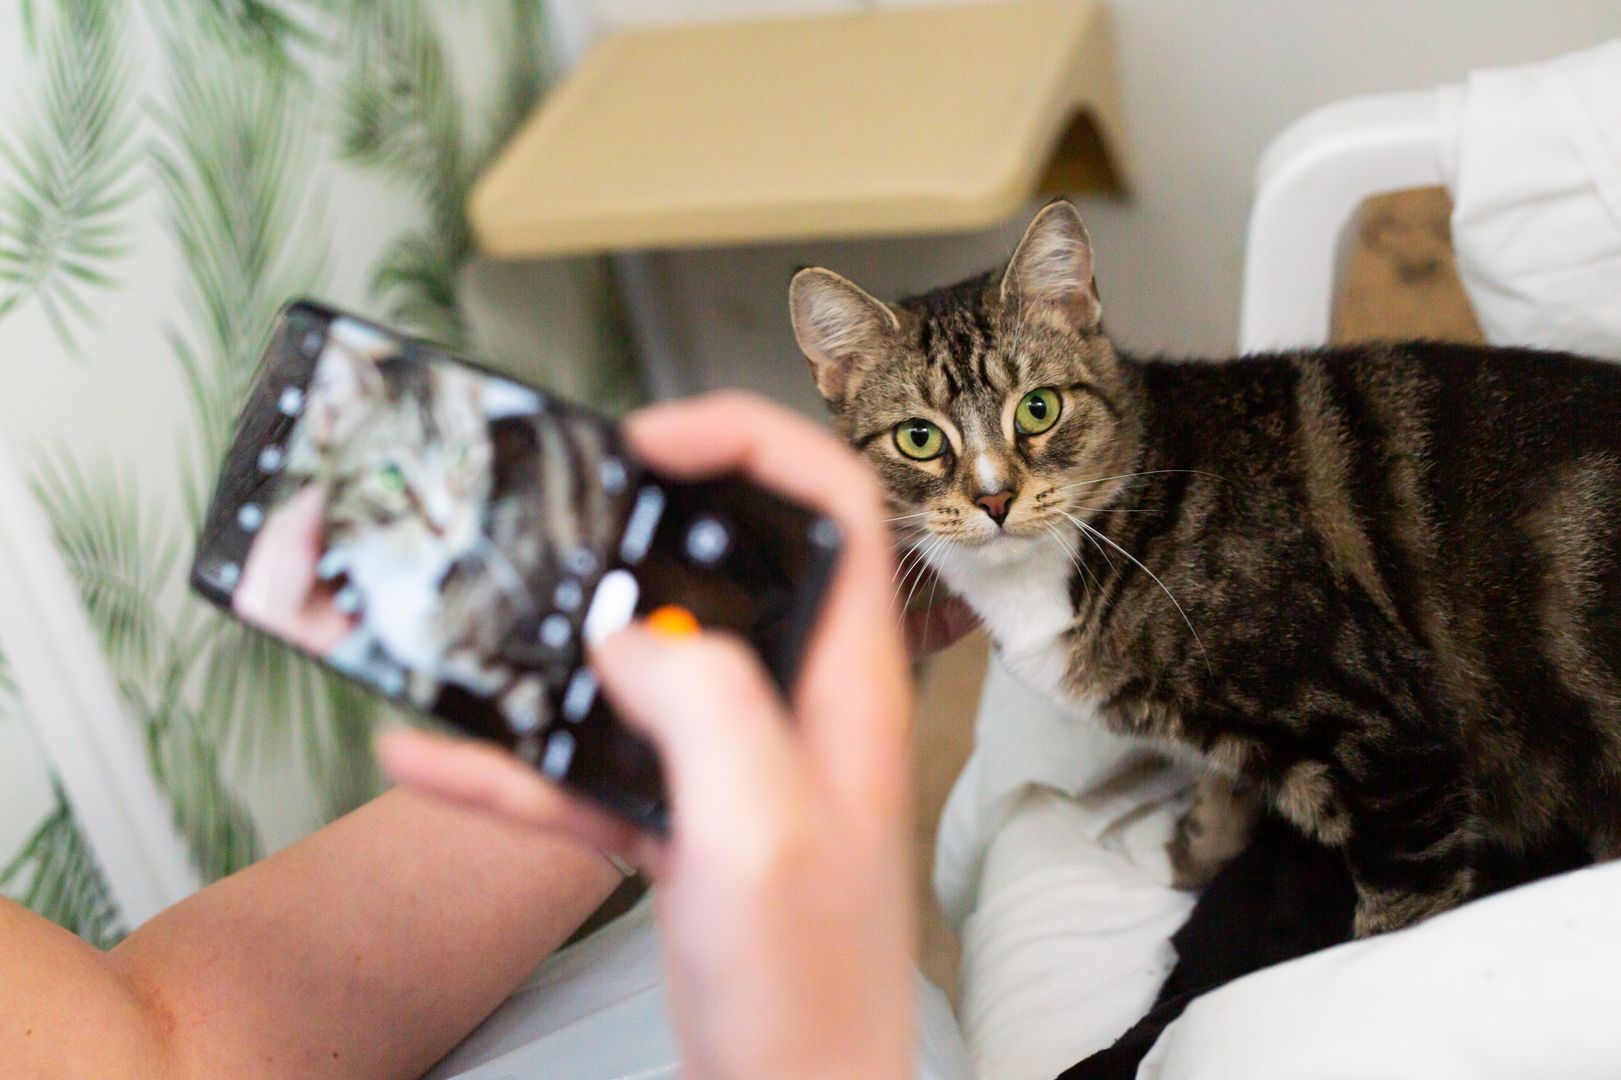 Choose your favourite photo of your feline friend or canine companion and use it to create a...